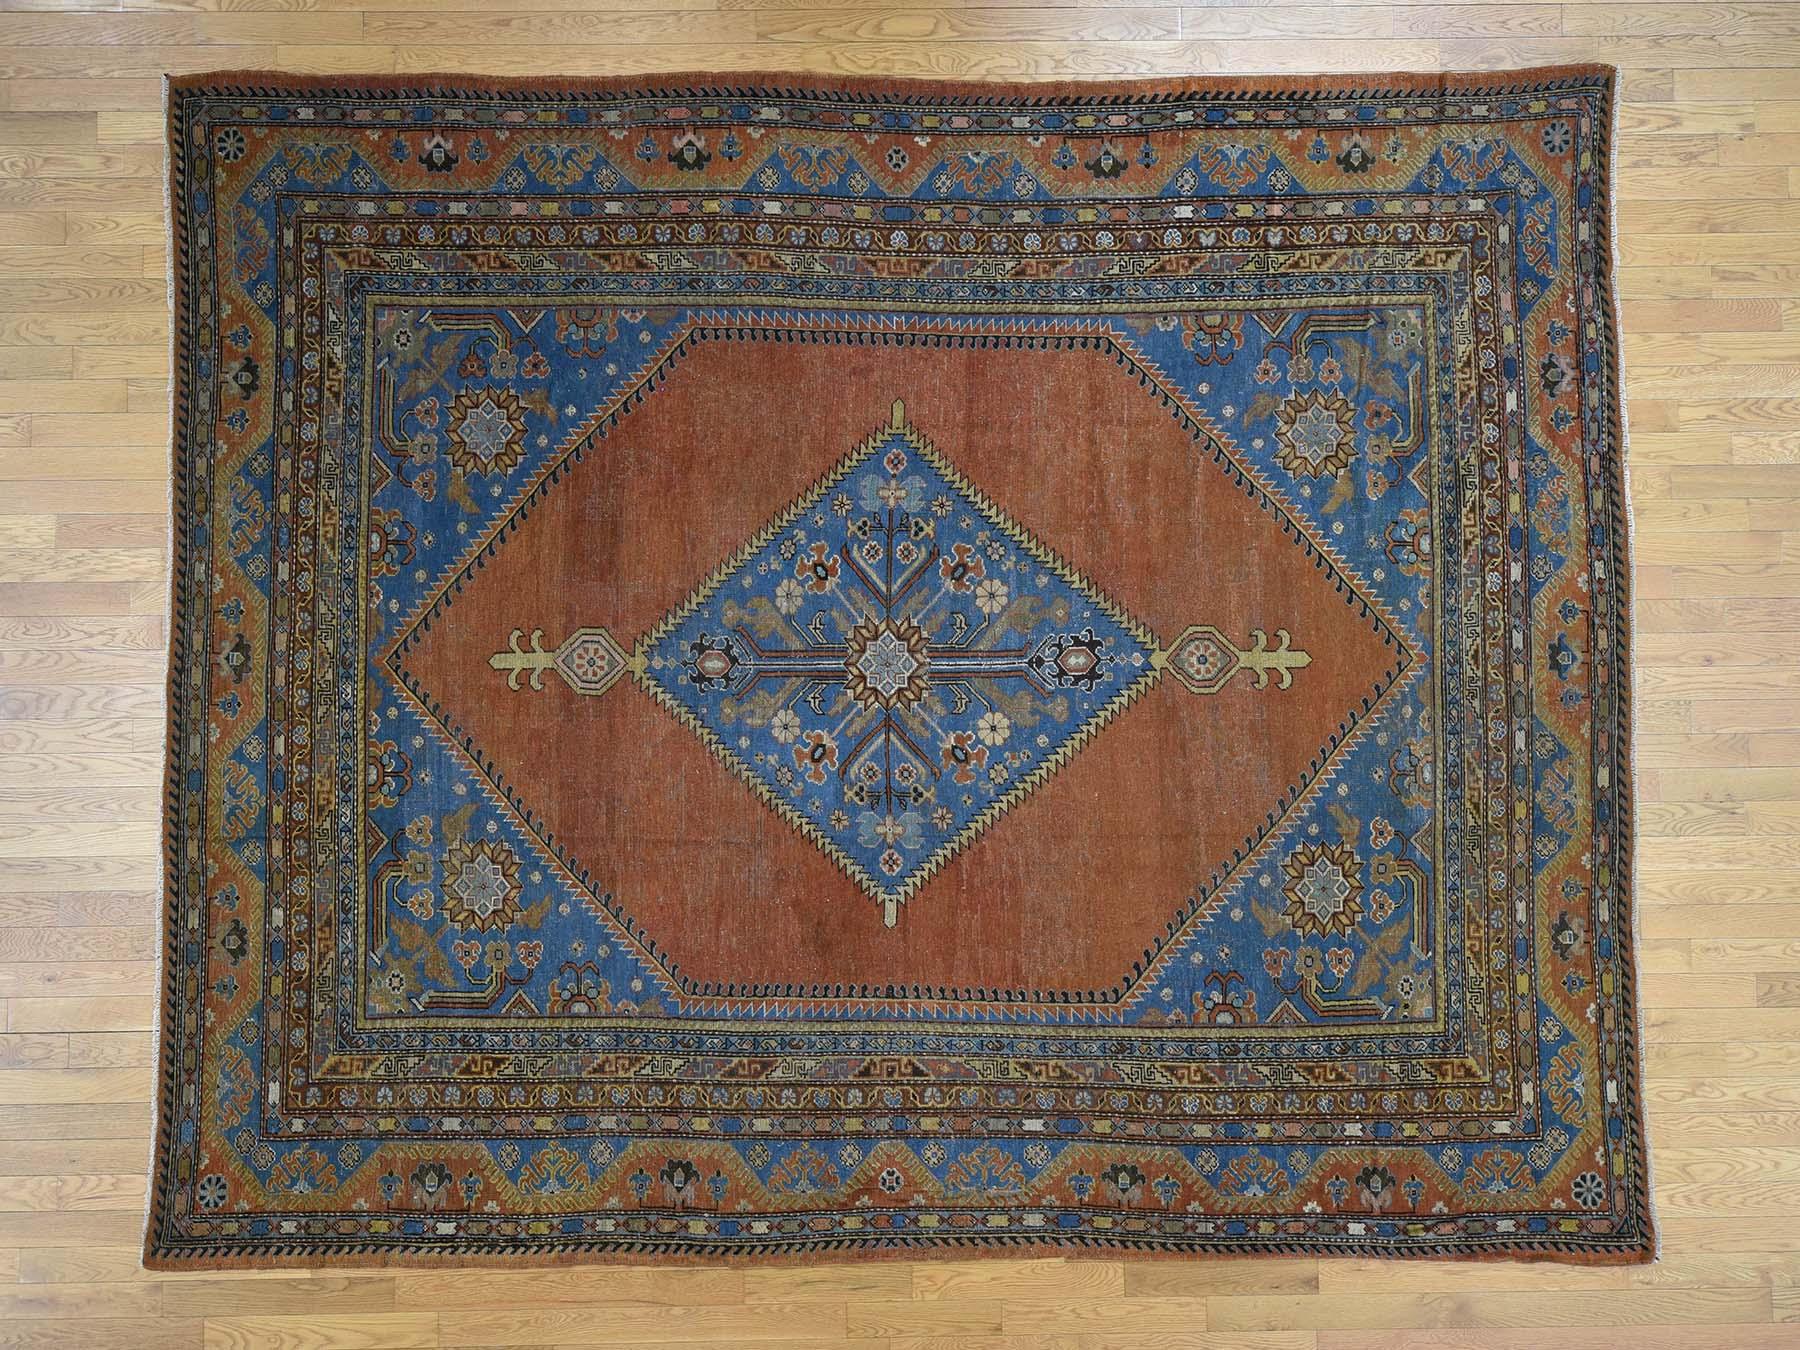 This is a genuine hand knotted oriental rug. It is not hand tufted or machine made rug. Our entire inventory is made of either hand knotted or handwoven rugs.

Enhance your home with this magnificent antique carpet. This handcrafted Samarkand